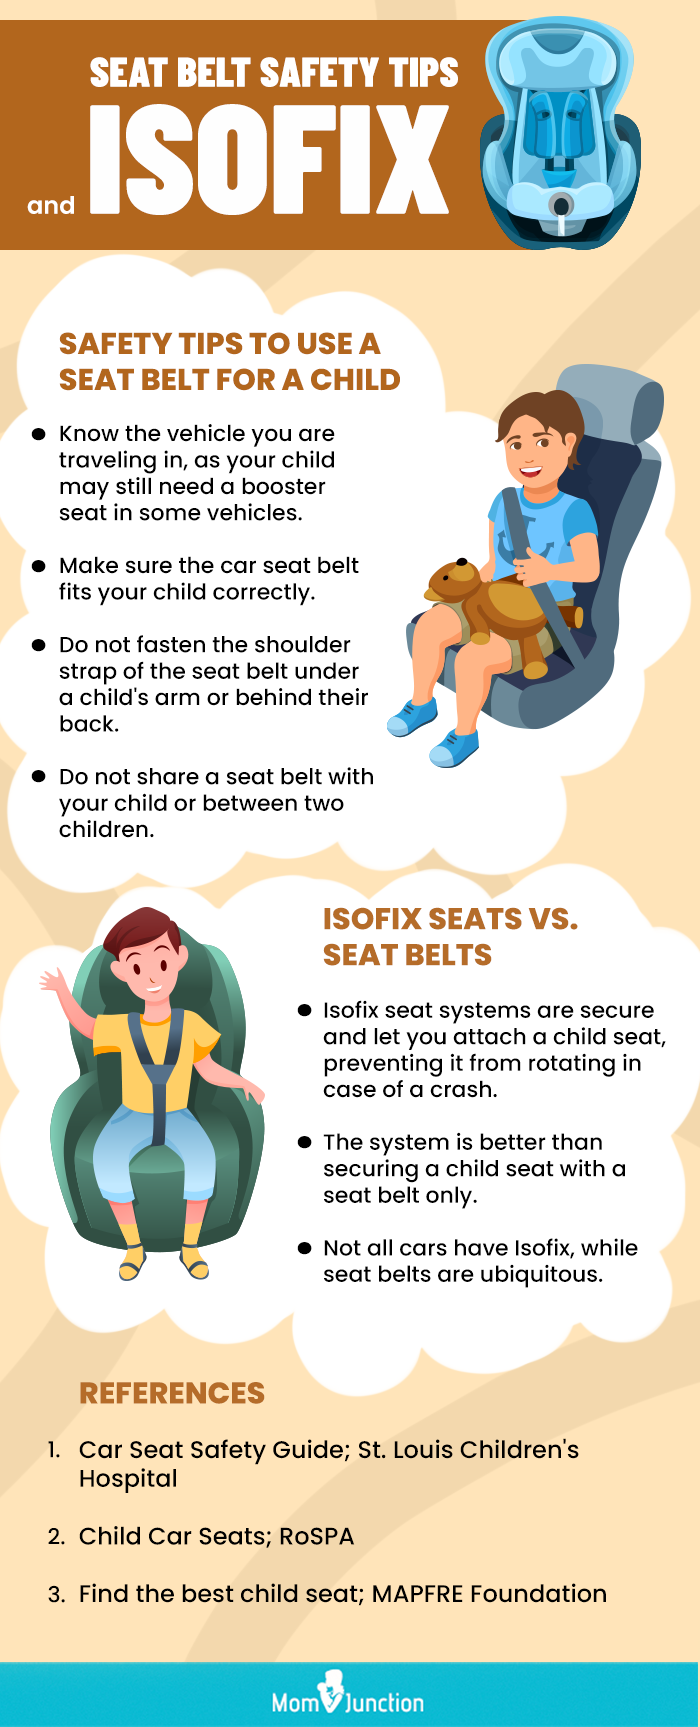 seat belt safety tips and isofix (infographic)